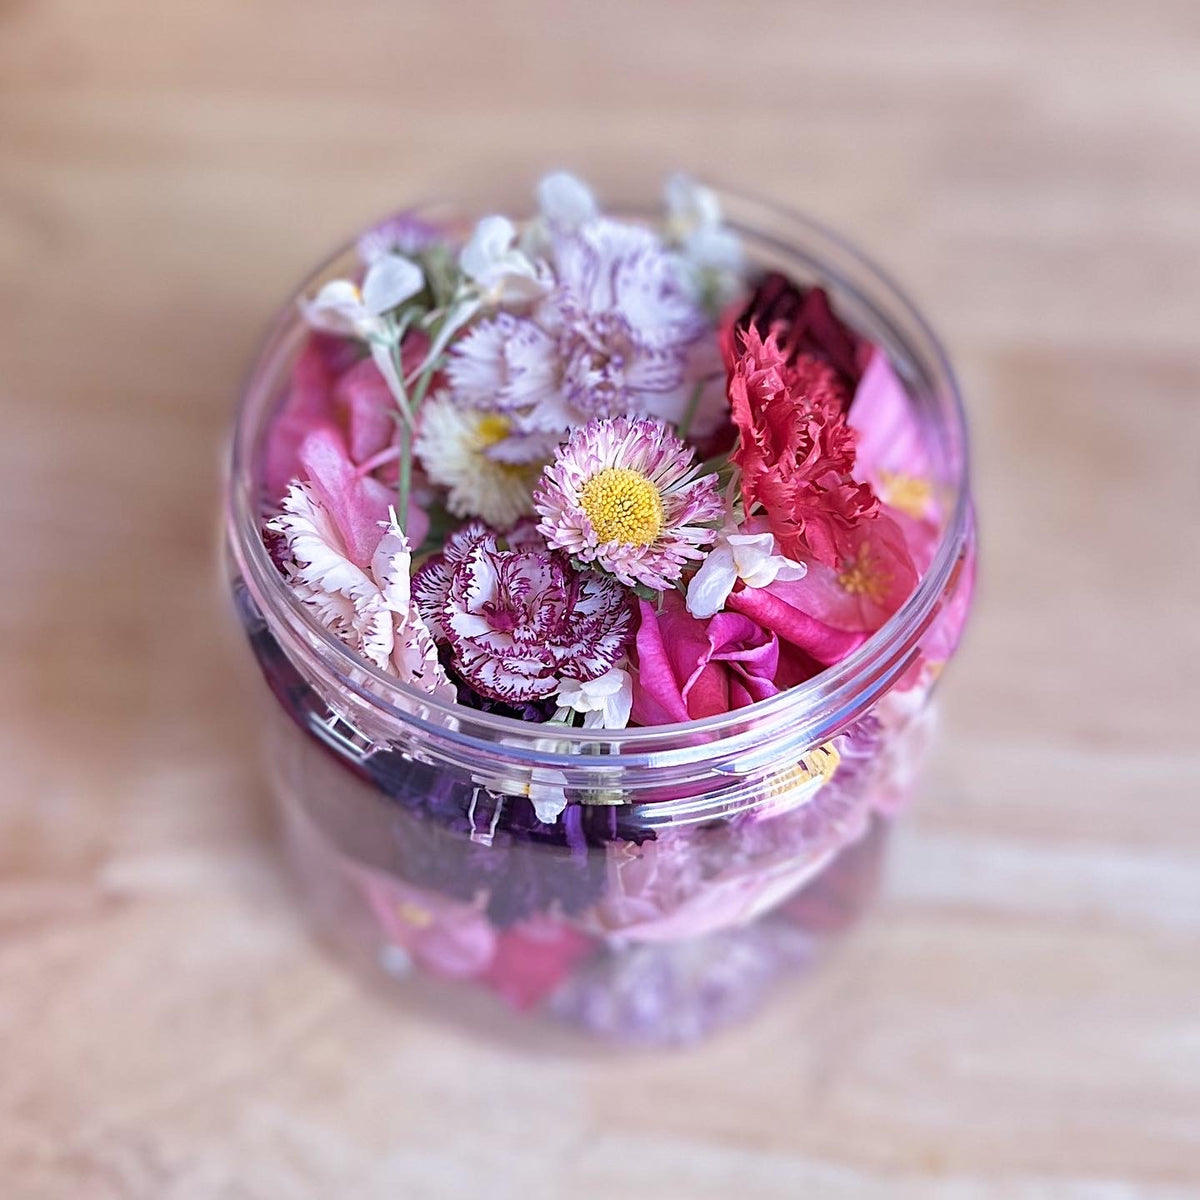 Blooming Beautiful jars of freeze dried edible flowers and cocktail garnishes.